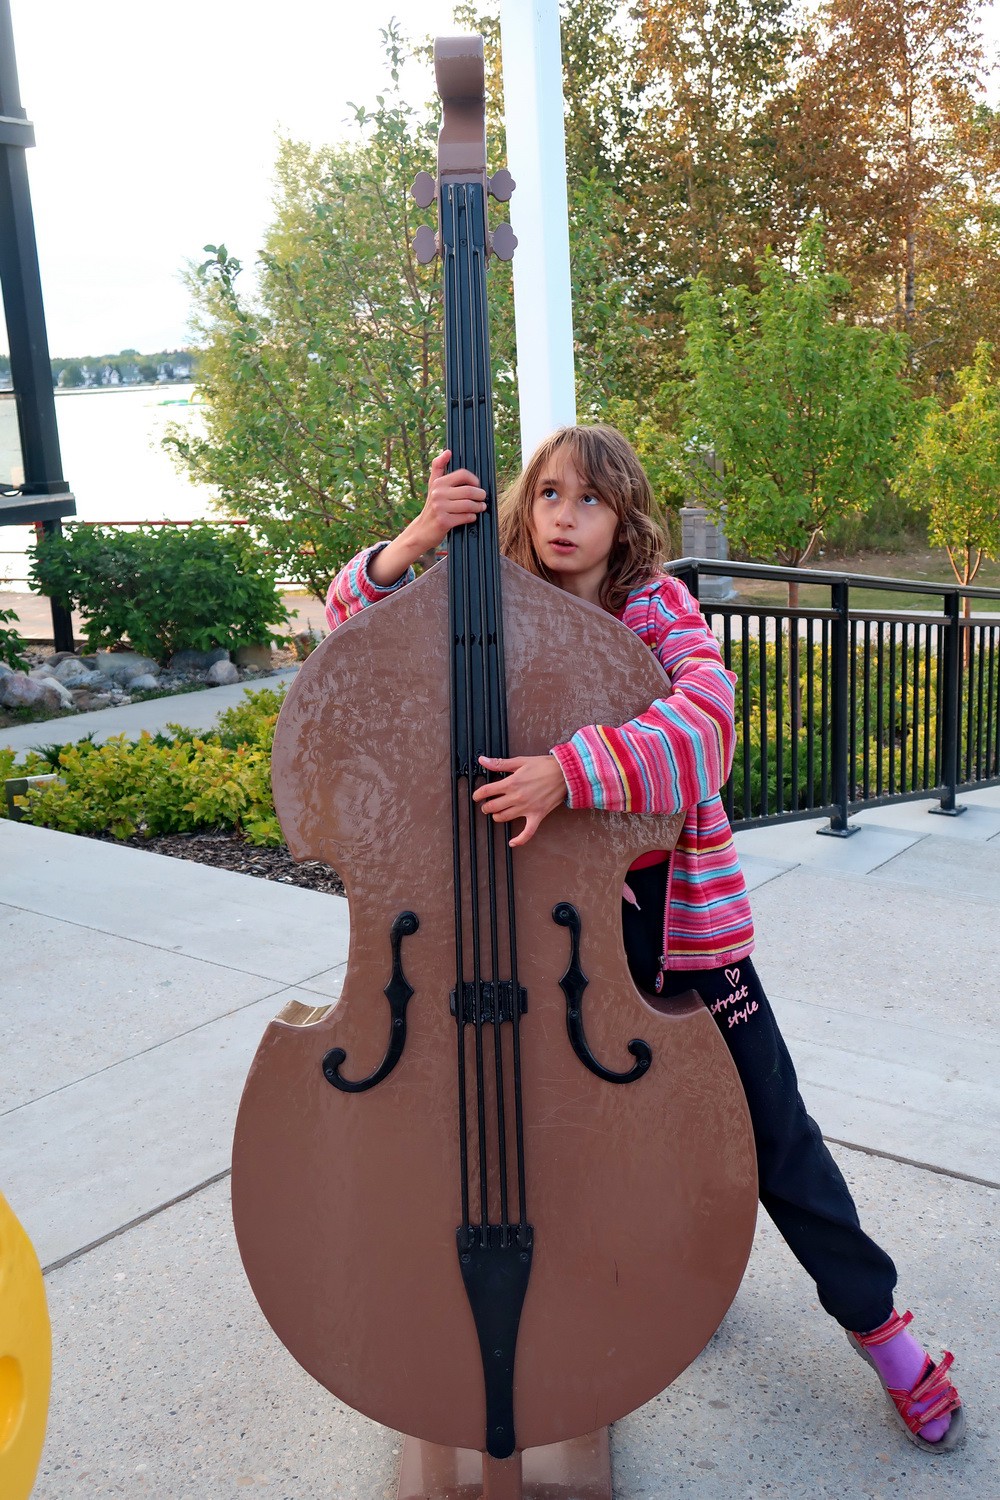 Rosemarie playing contrabass with Sylvan Lake in the background